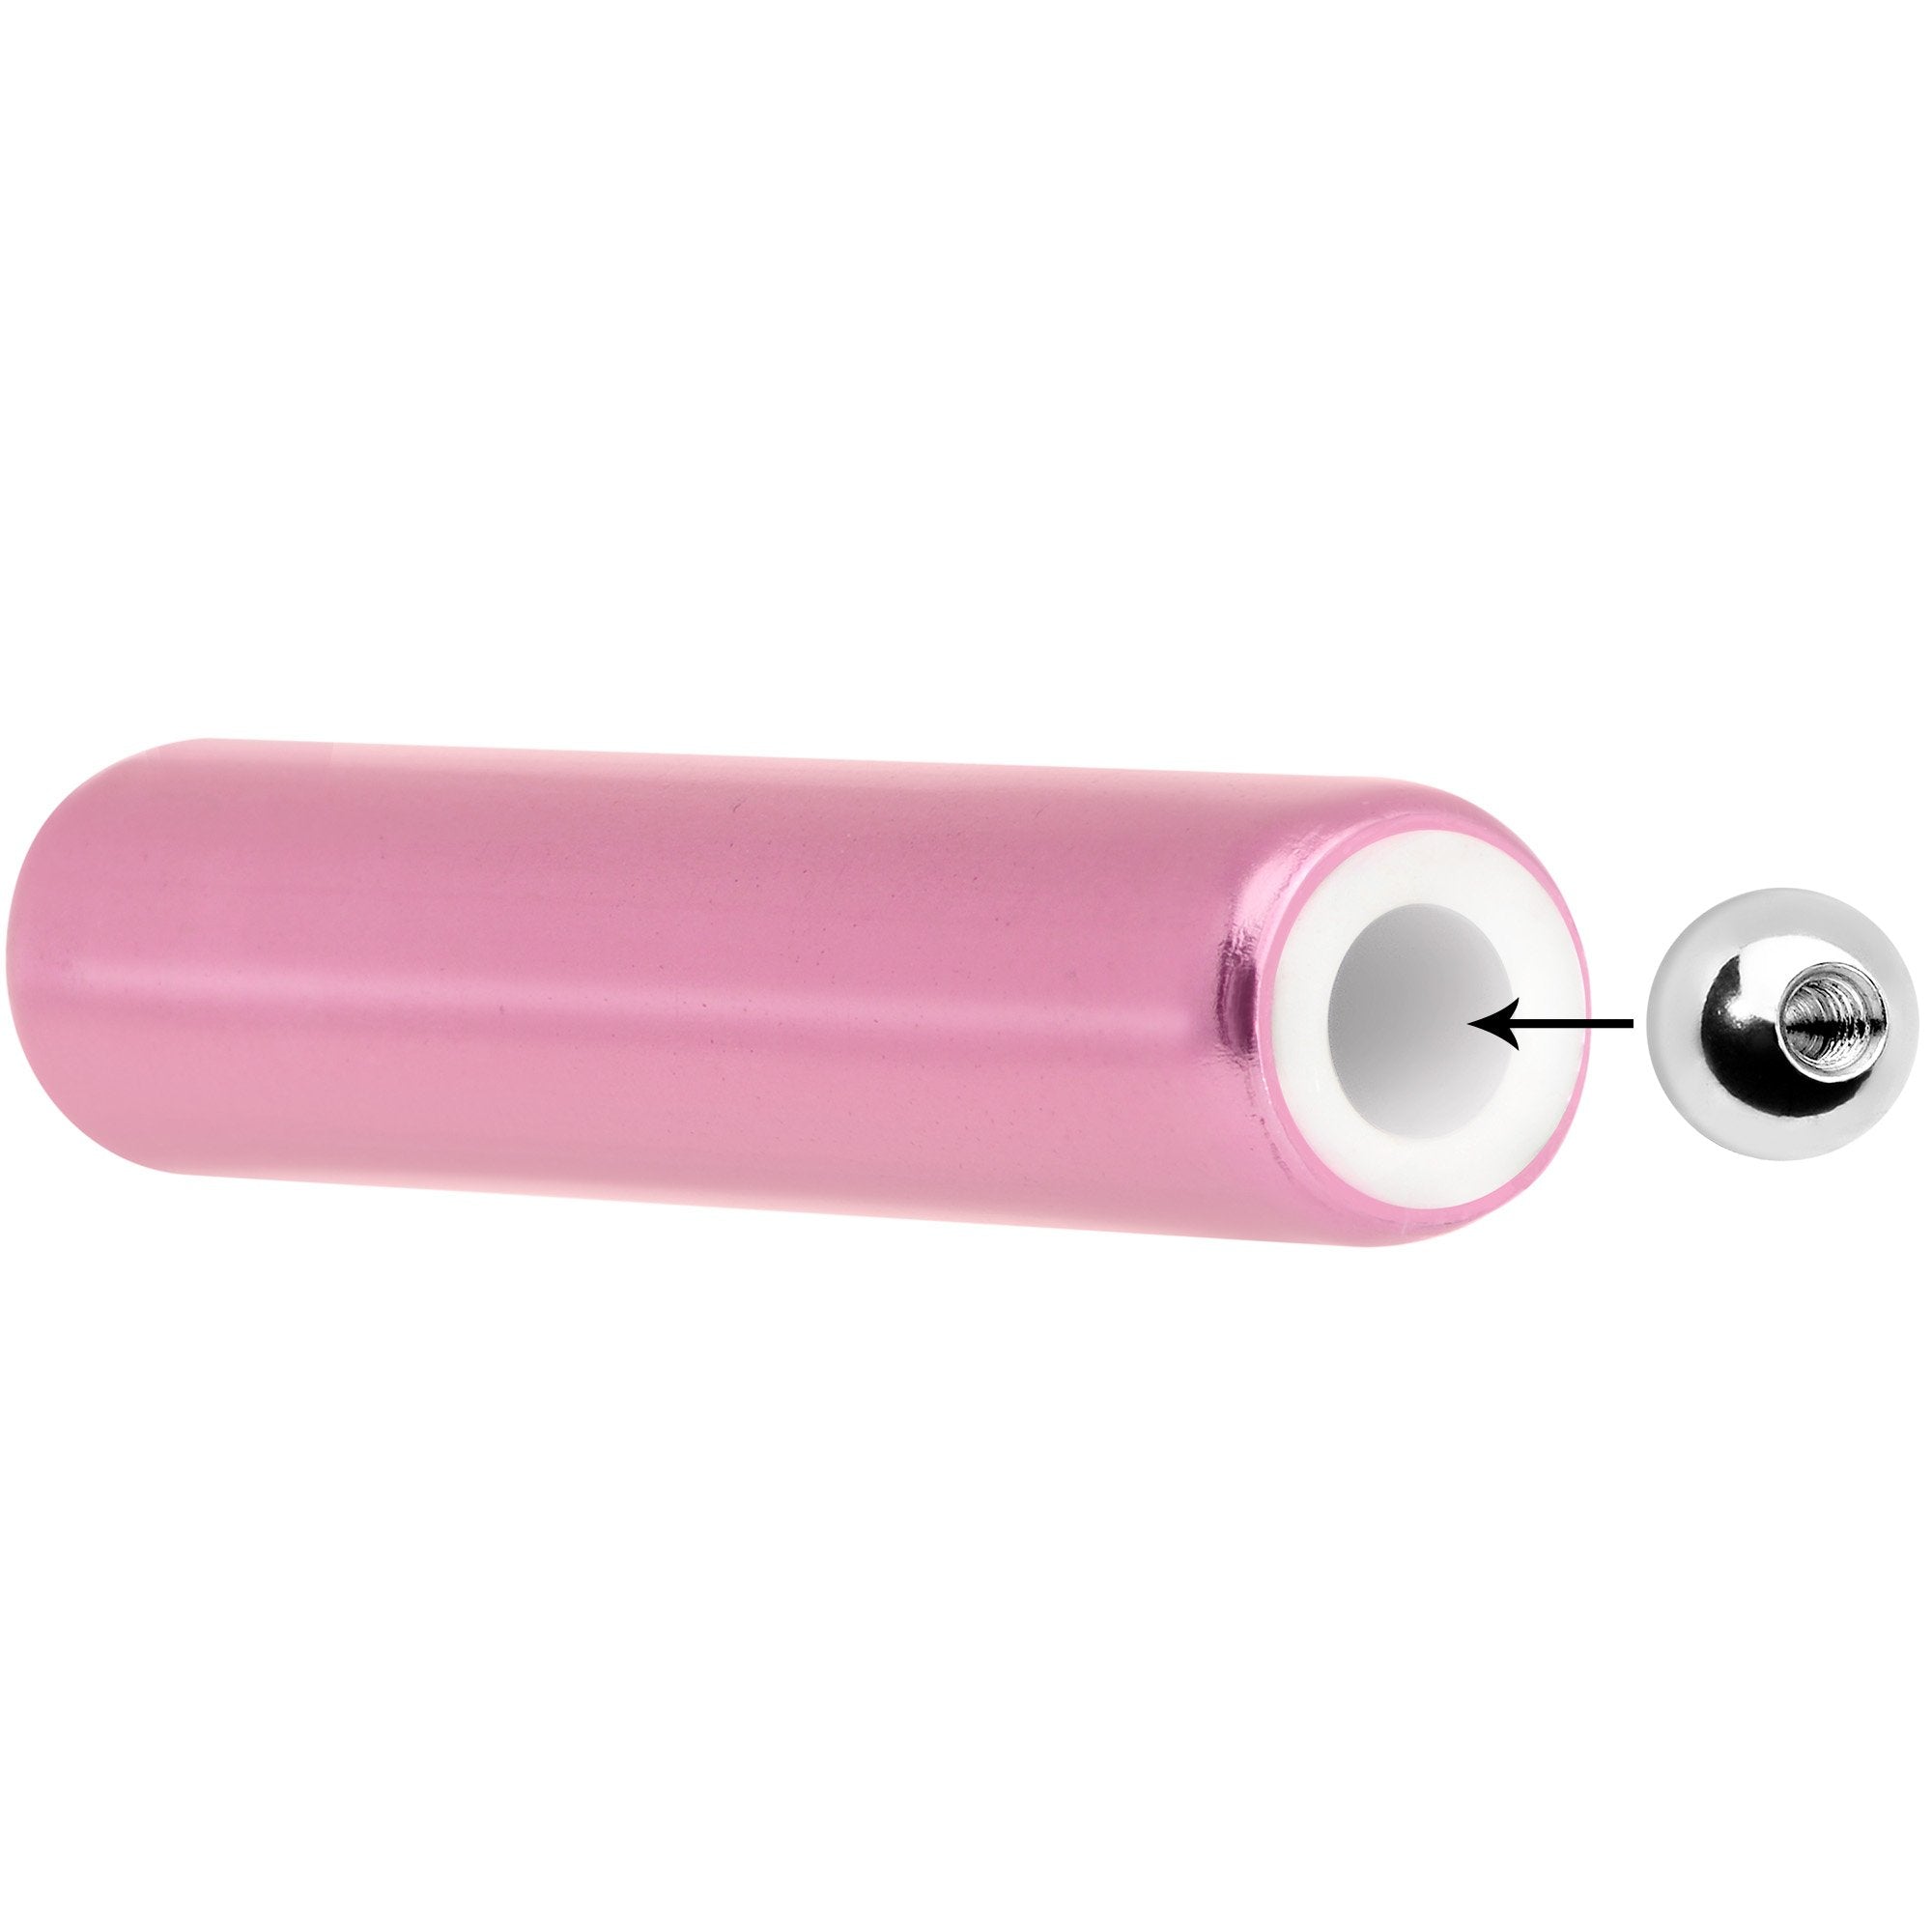 5mm to 6mm Pink Aluminium Body Piercing Ball Removal Tool For Piercings